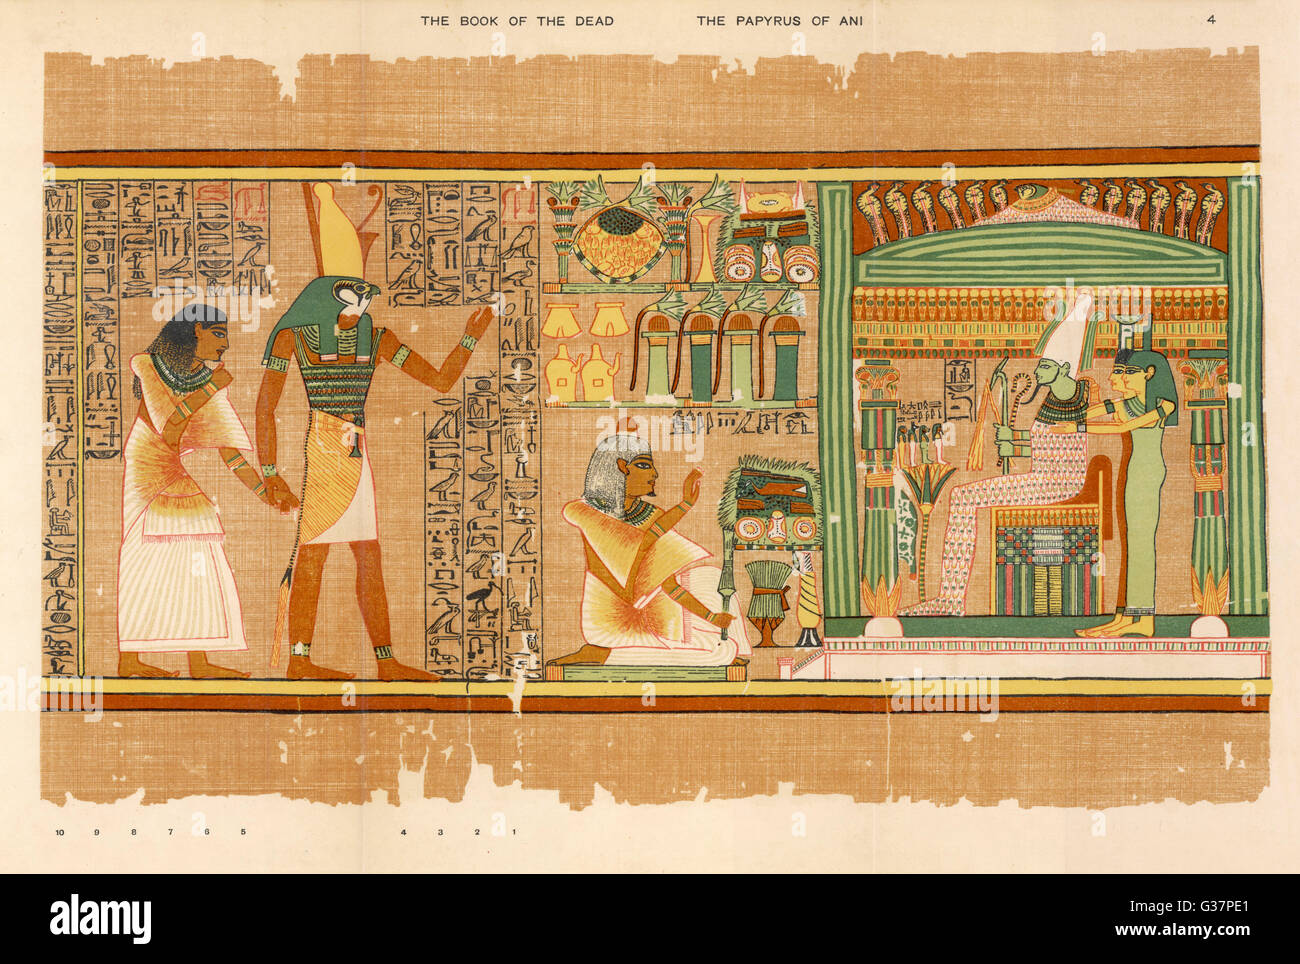 PAPYRUS OF ANI The dead Ani, judged innocent,  is presented by Horus to  Osiris.  He kneels with  whitened hair. Stock Photo